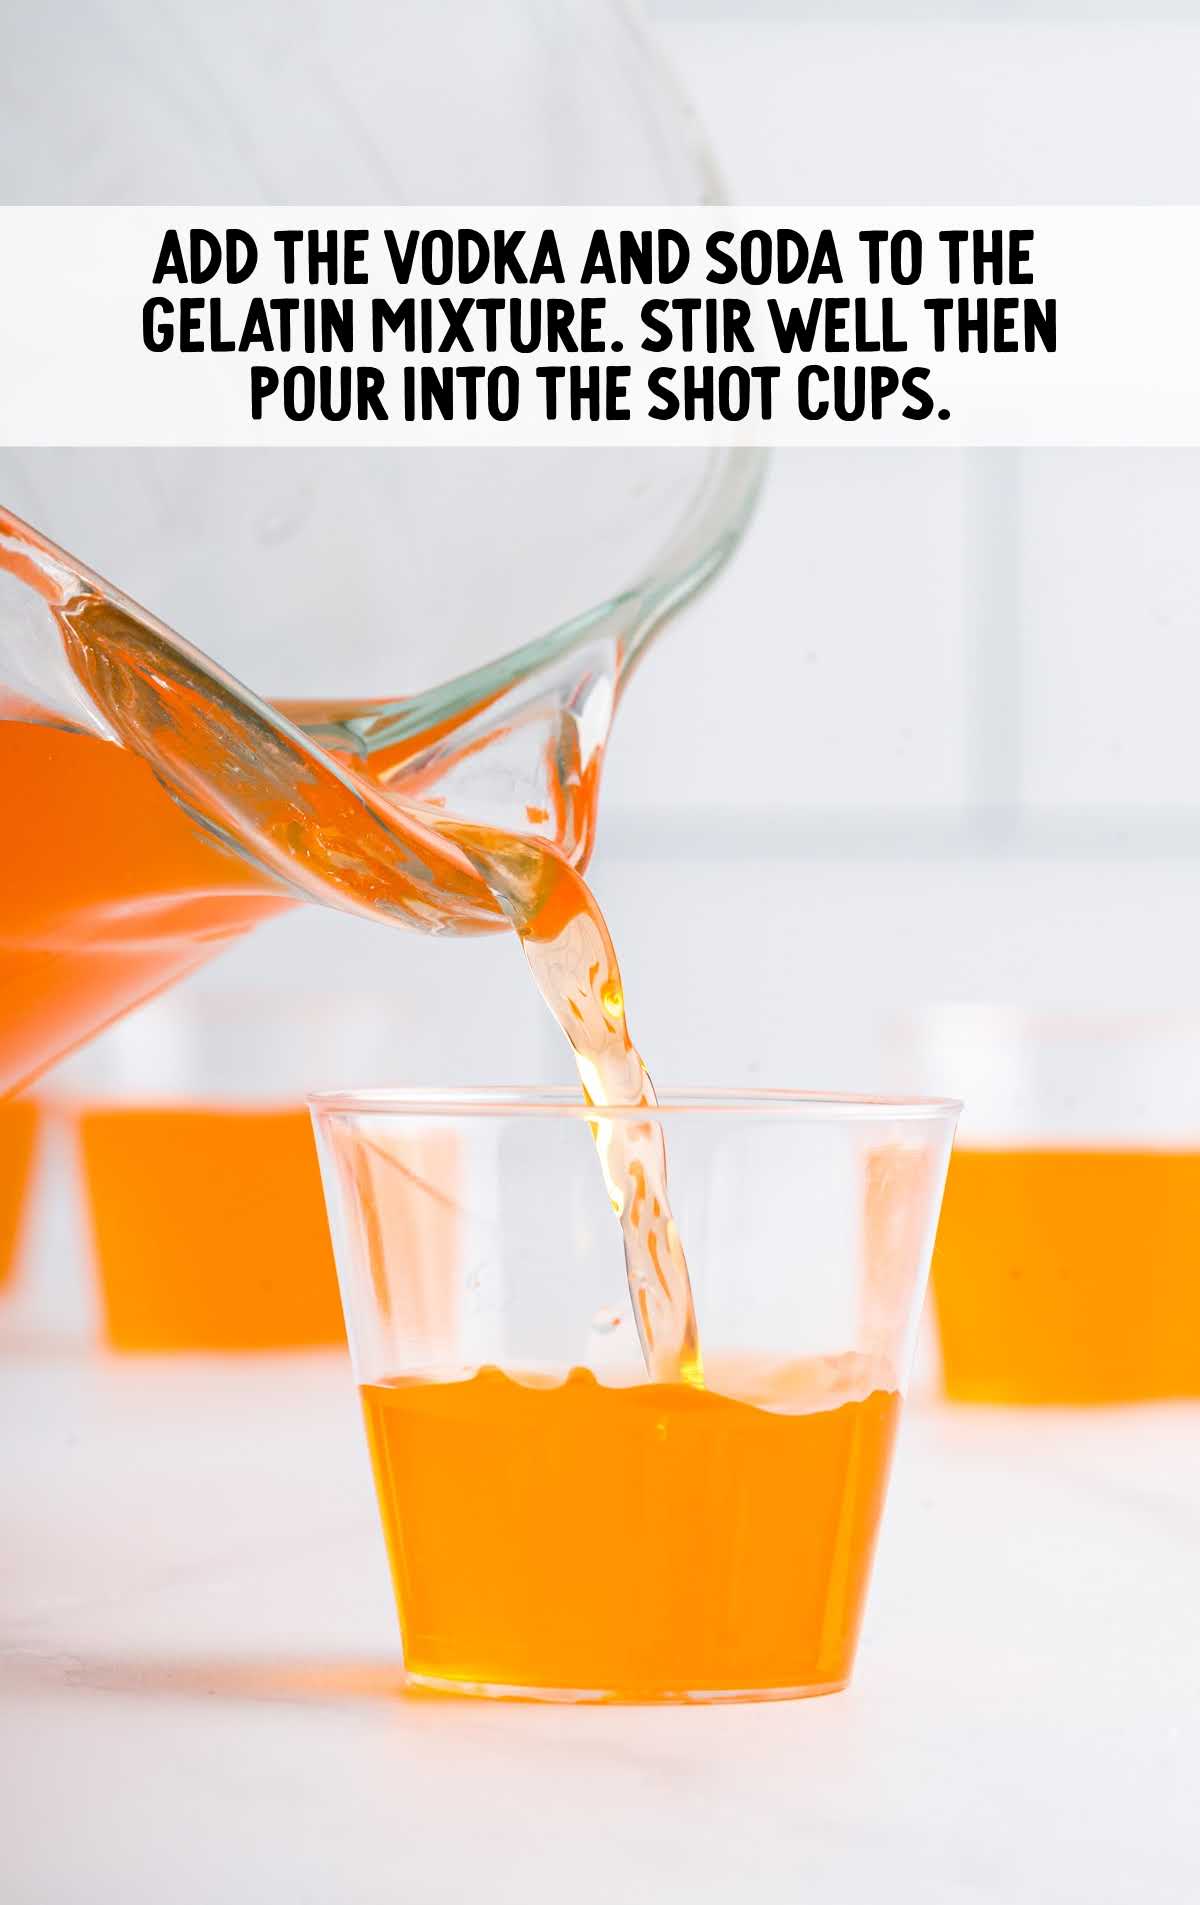 Creamsicle Jello Shot process shot of vodka and soda added to the gelatin mixture then poured into the shot cups